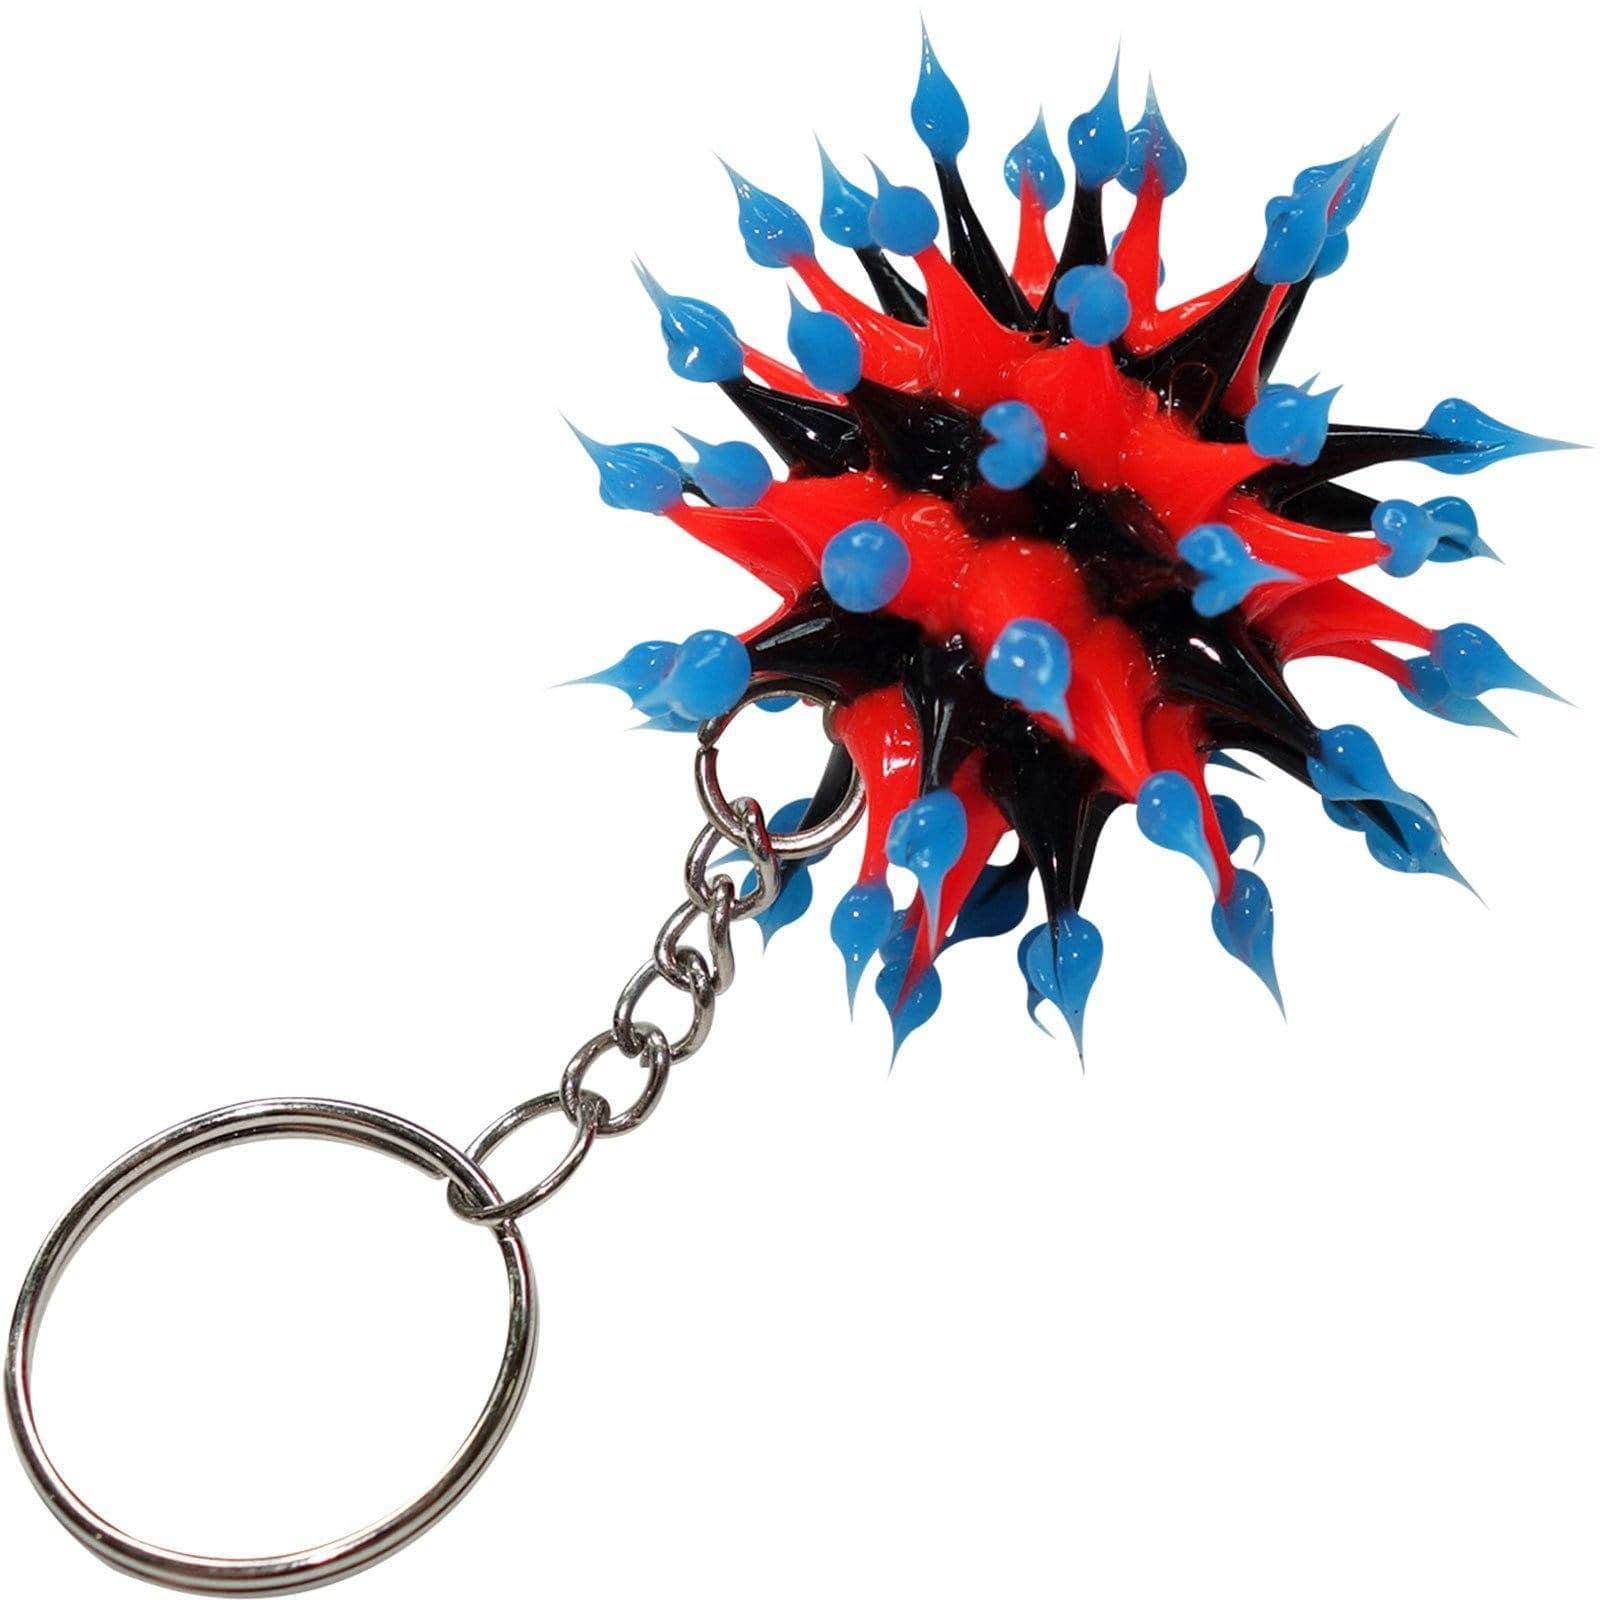 2 X Bright Colourful Spiky Neon Ball Keyrings Rubber Silicone Keychains Key Fobs